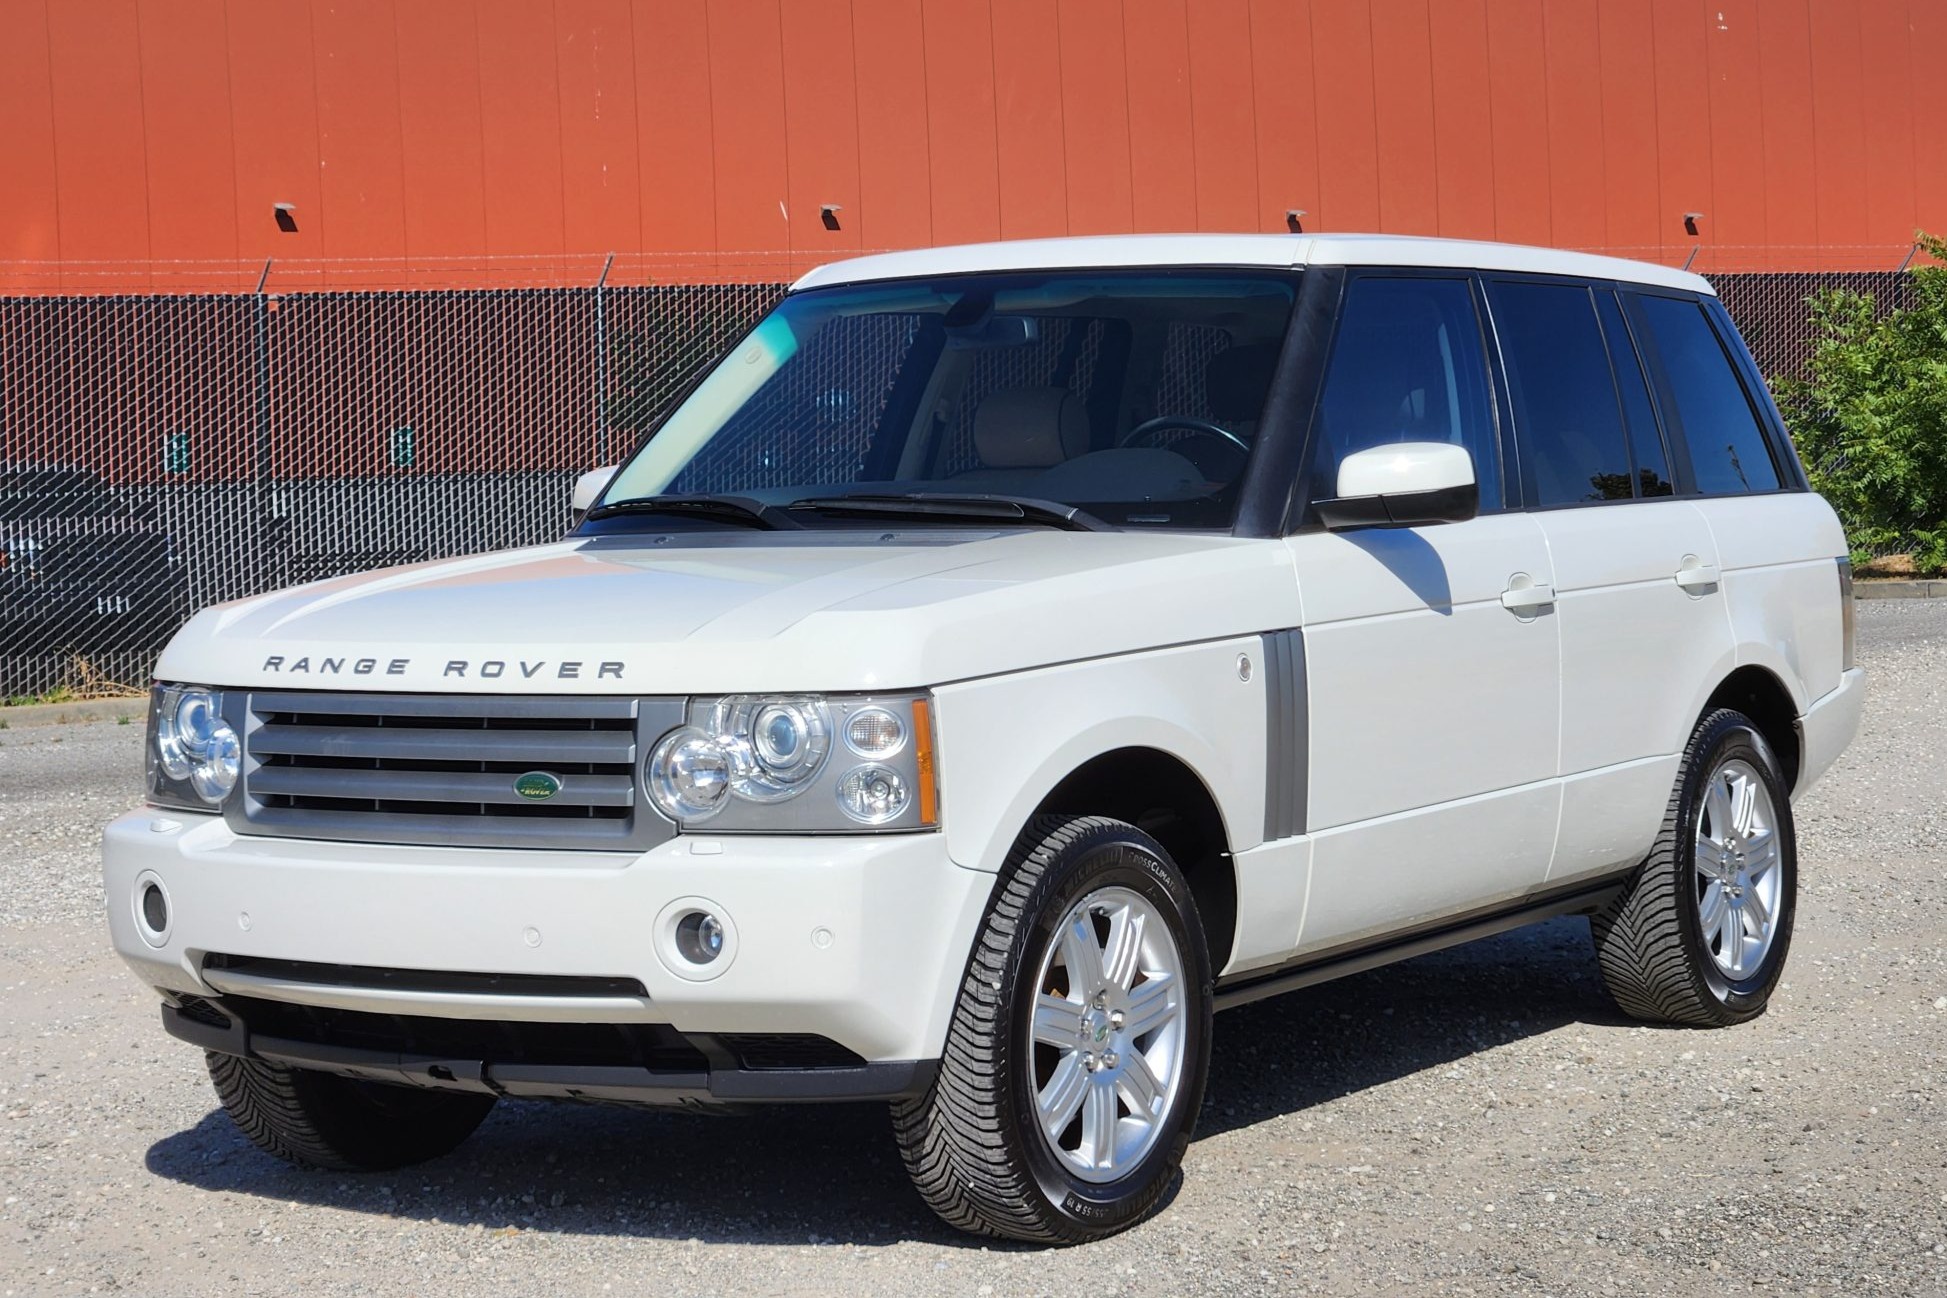 Used 2006 Land Rover Range Rover HSE Review